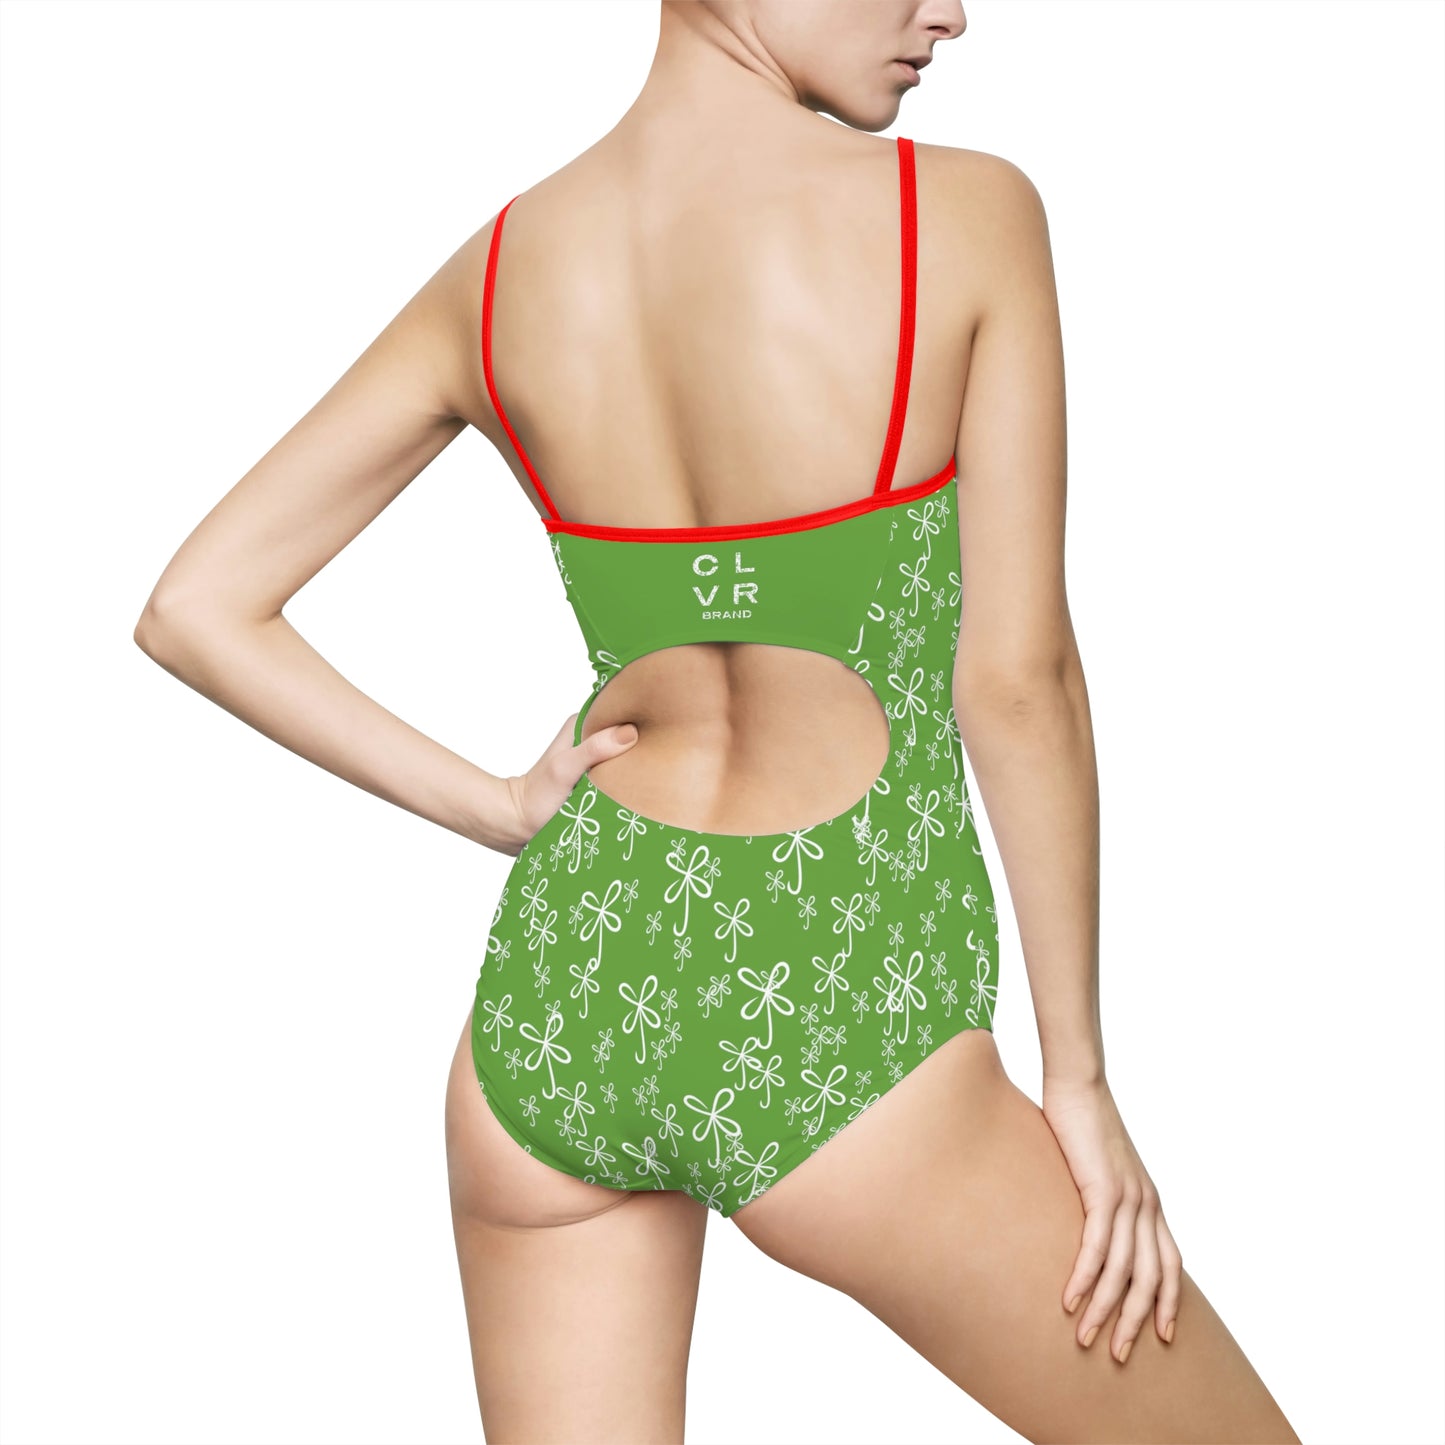 CLVR Women's One-piece Spaghetti Strap Swimsuit in Green with Field of White